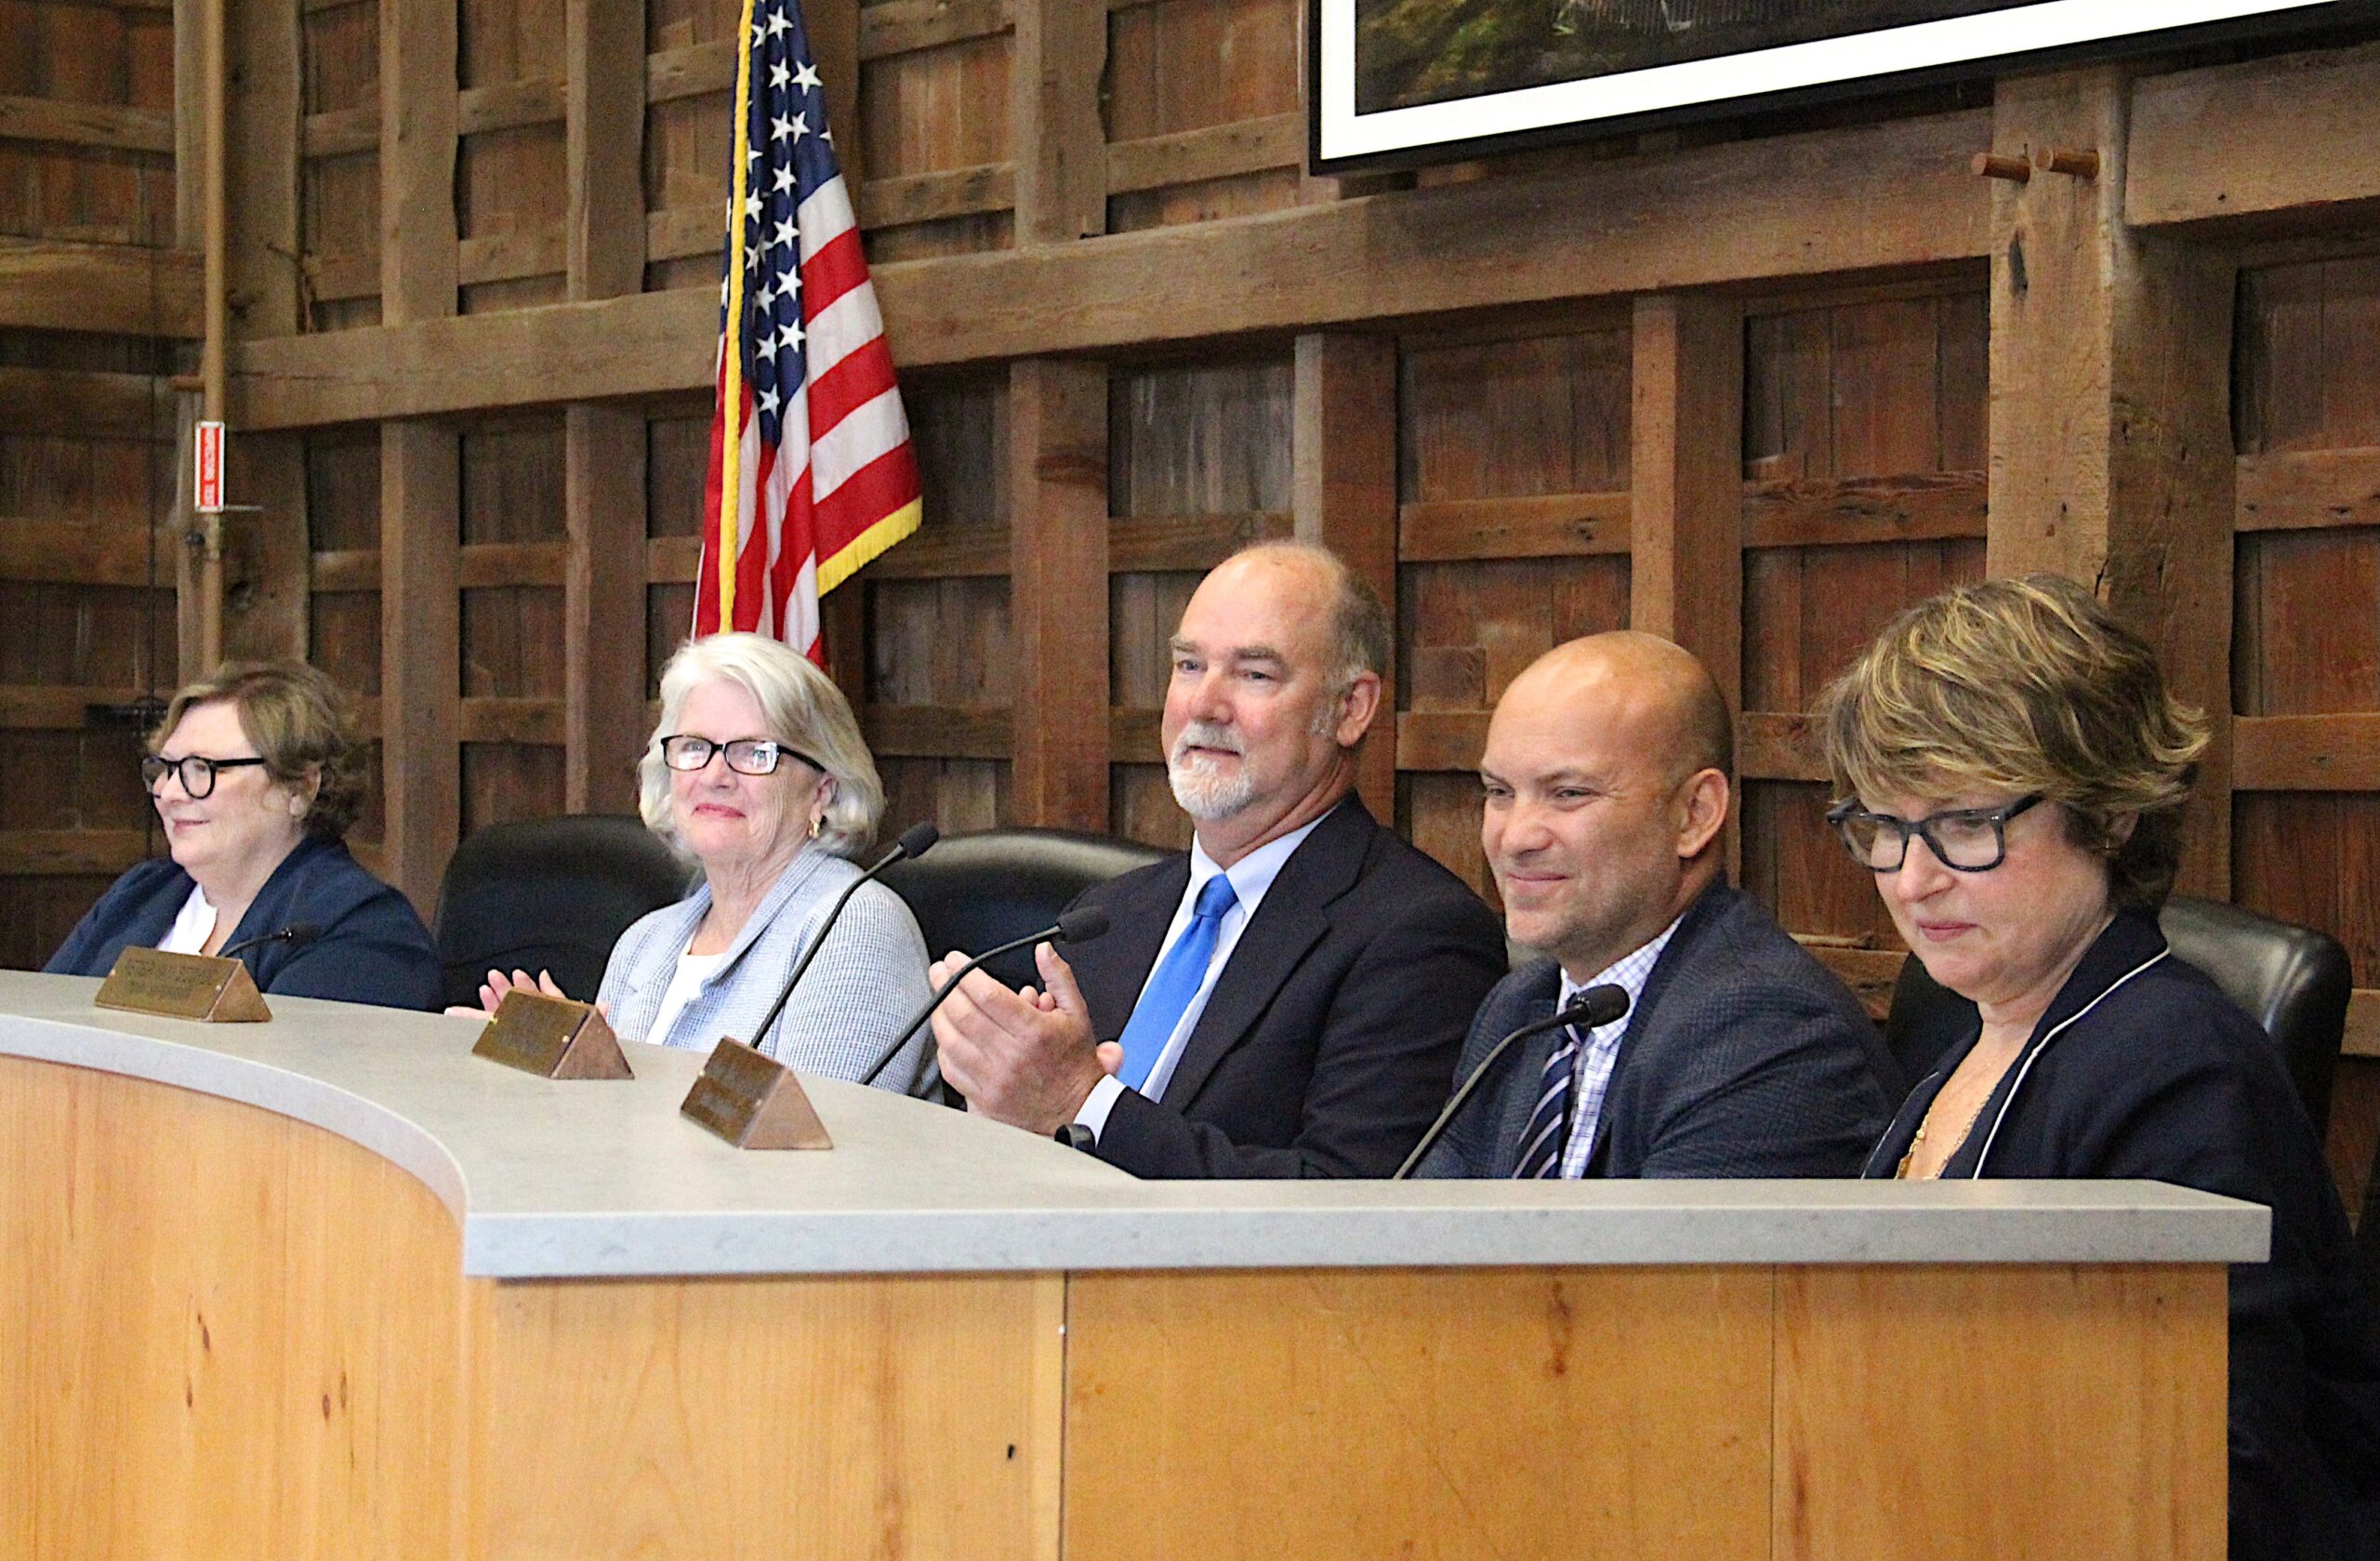 East Hampton Supervisor Peter Van Scoyoc, center, will not seek reelection this year. Councilwoman Kathee Burke-Gonzalez, right, has said she will seek the Democratic Party's nomination to succeed him.